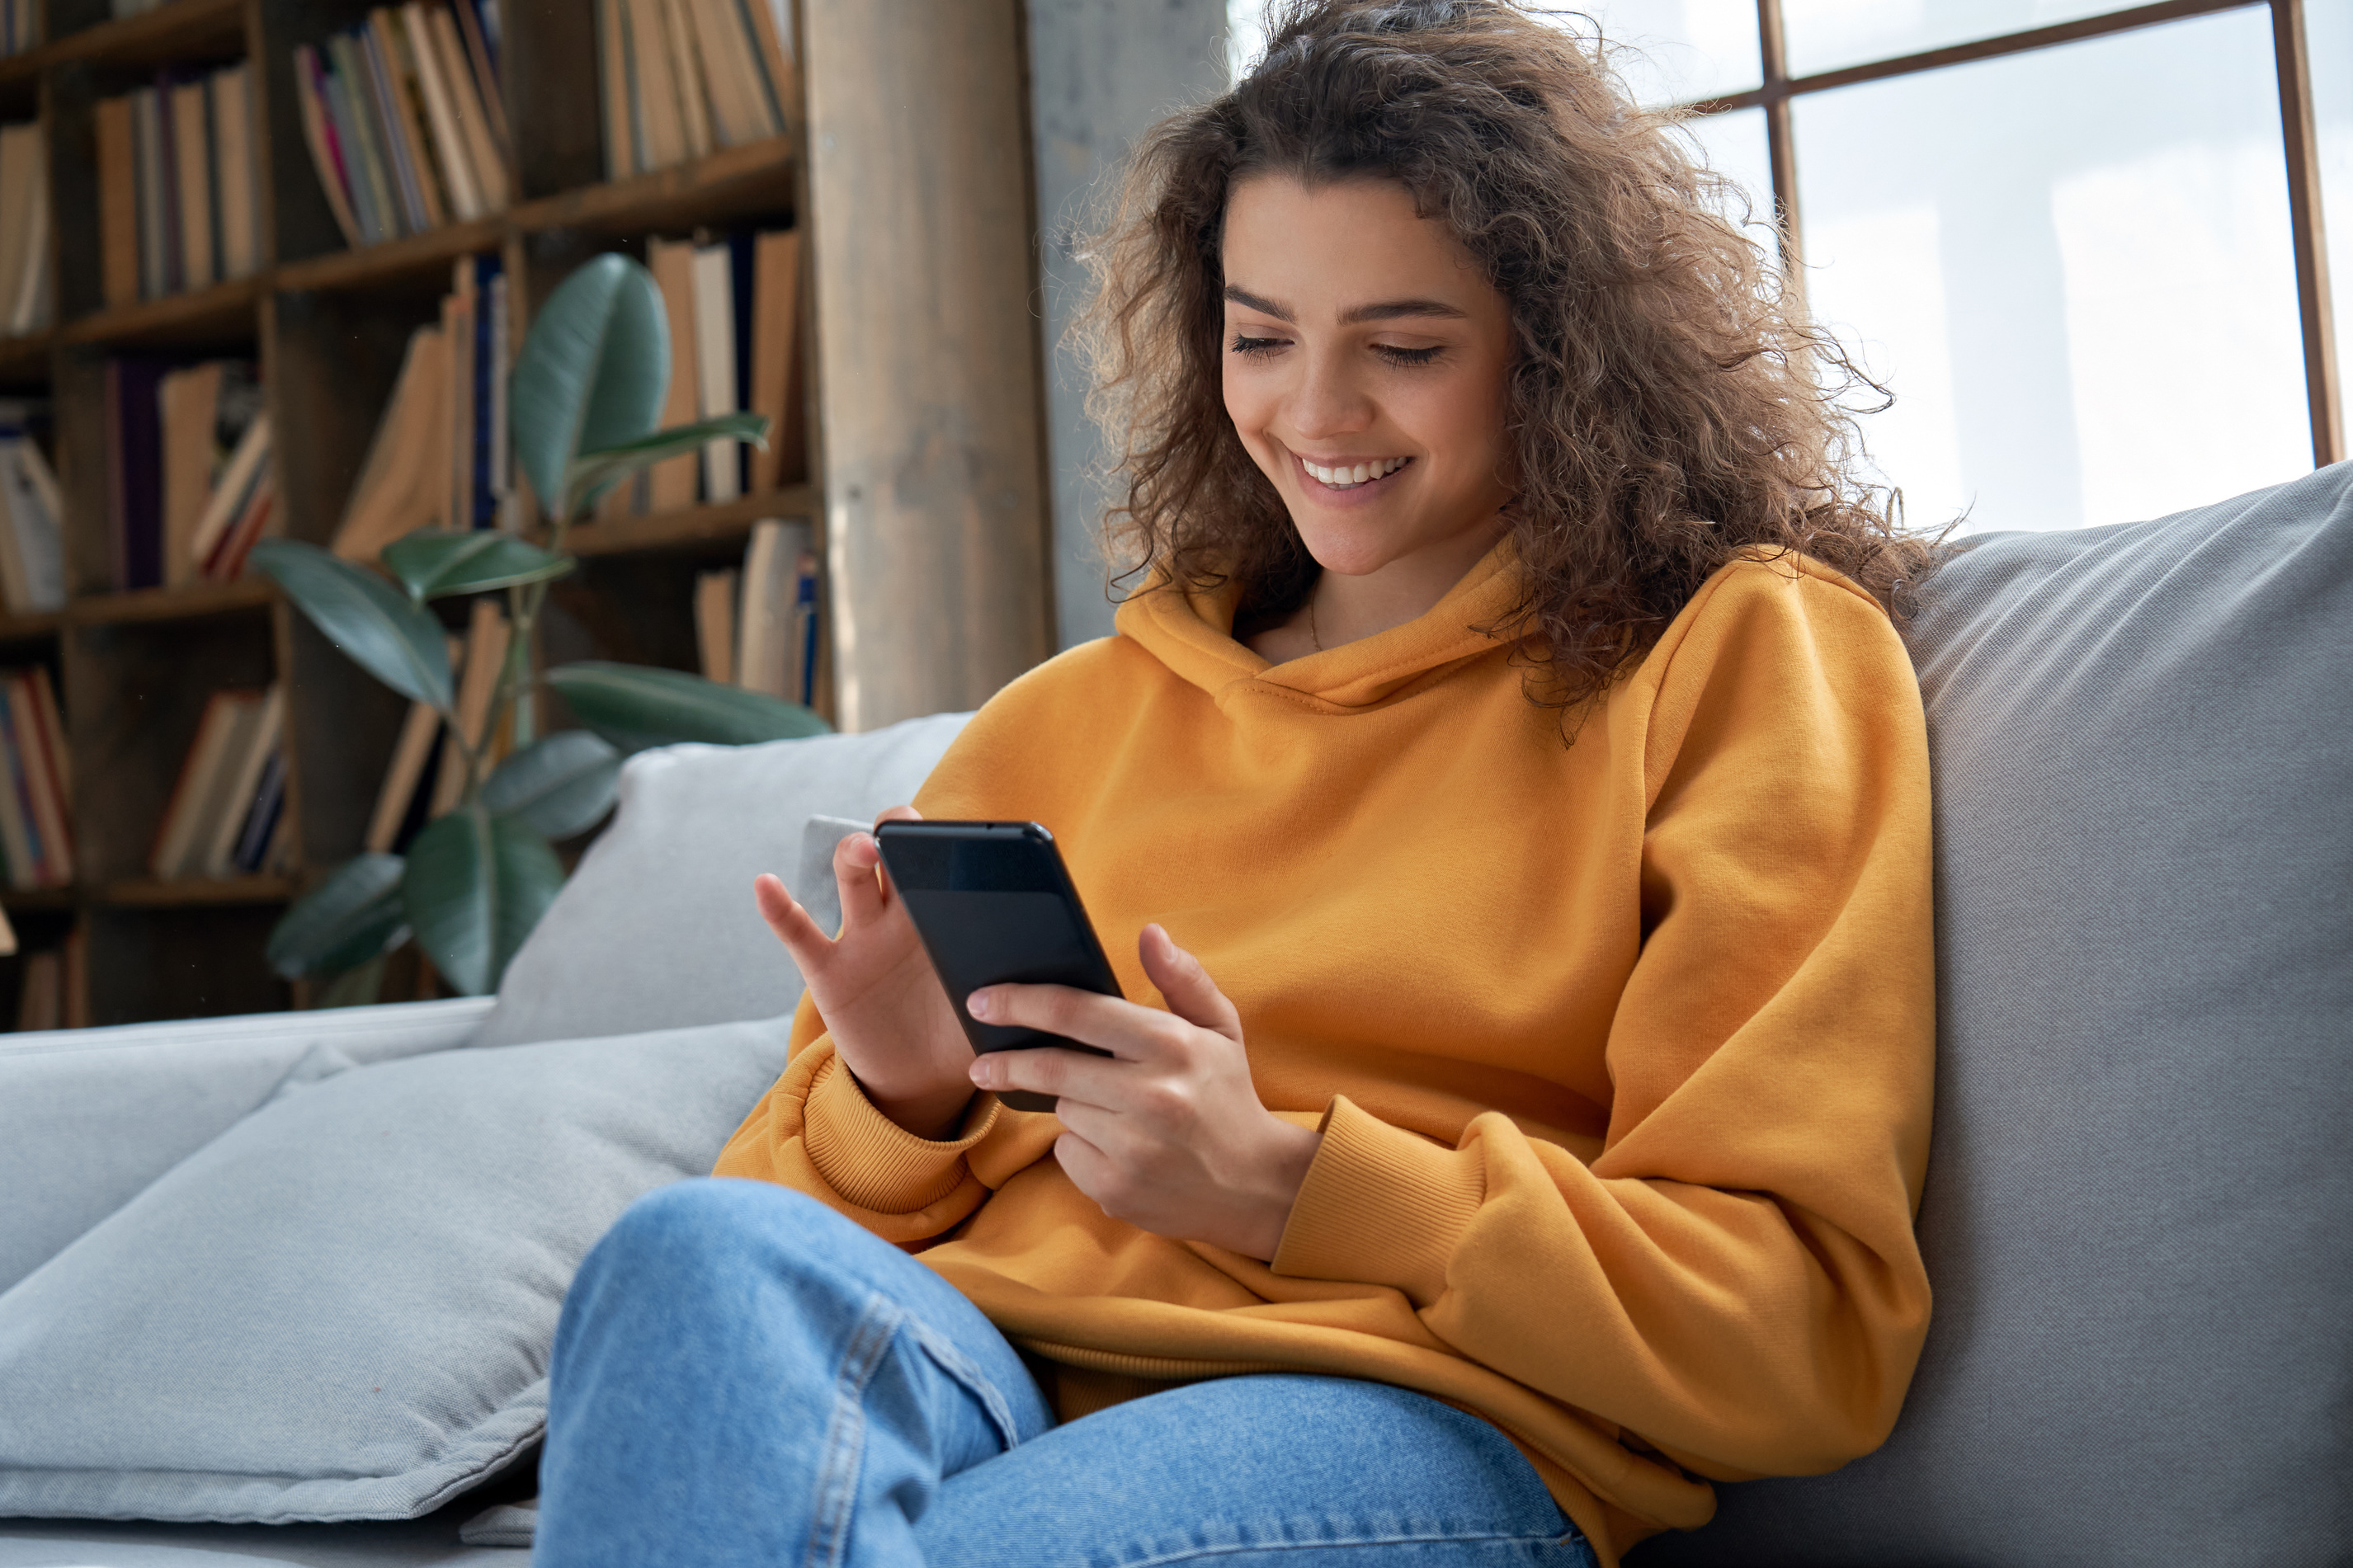 Woman sitting on a couch smiling and scrolling through her phone